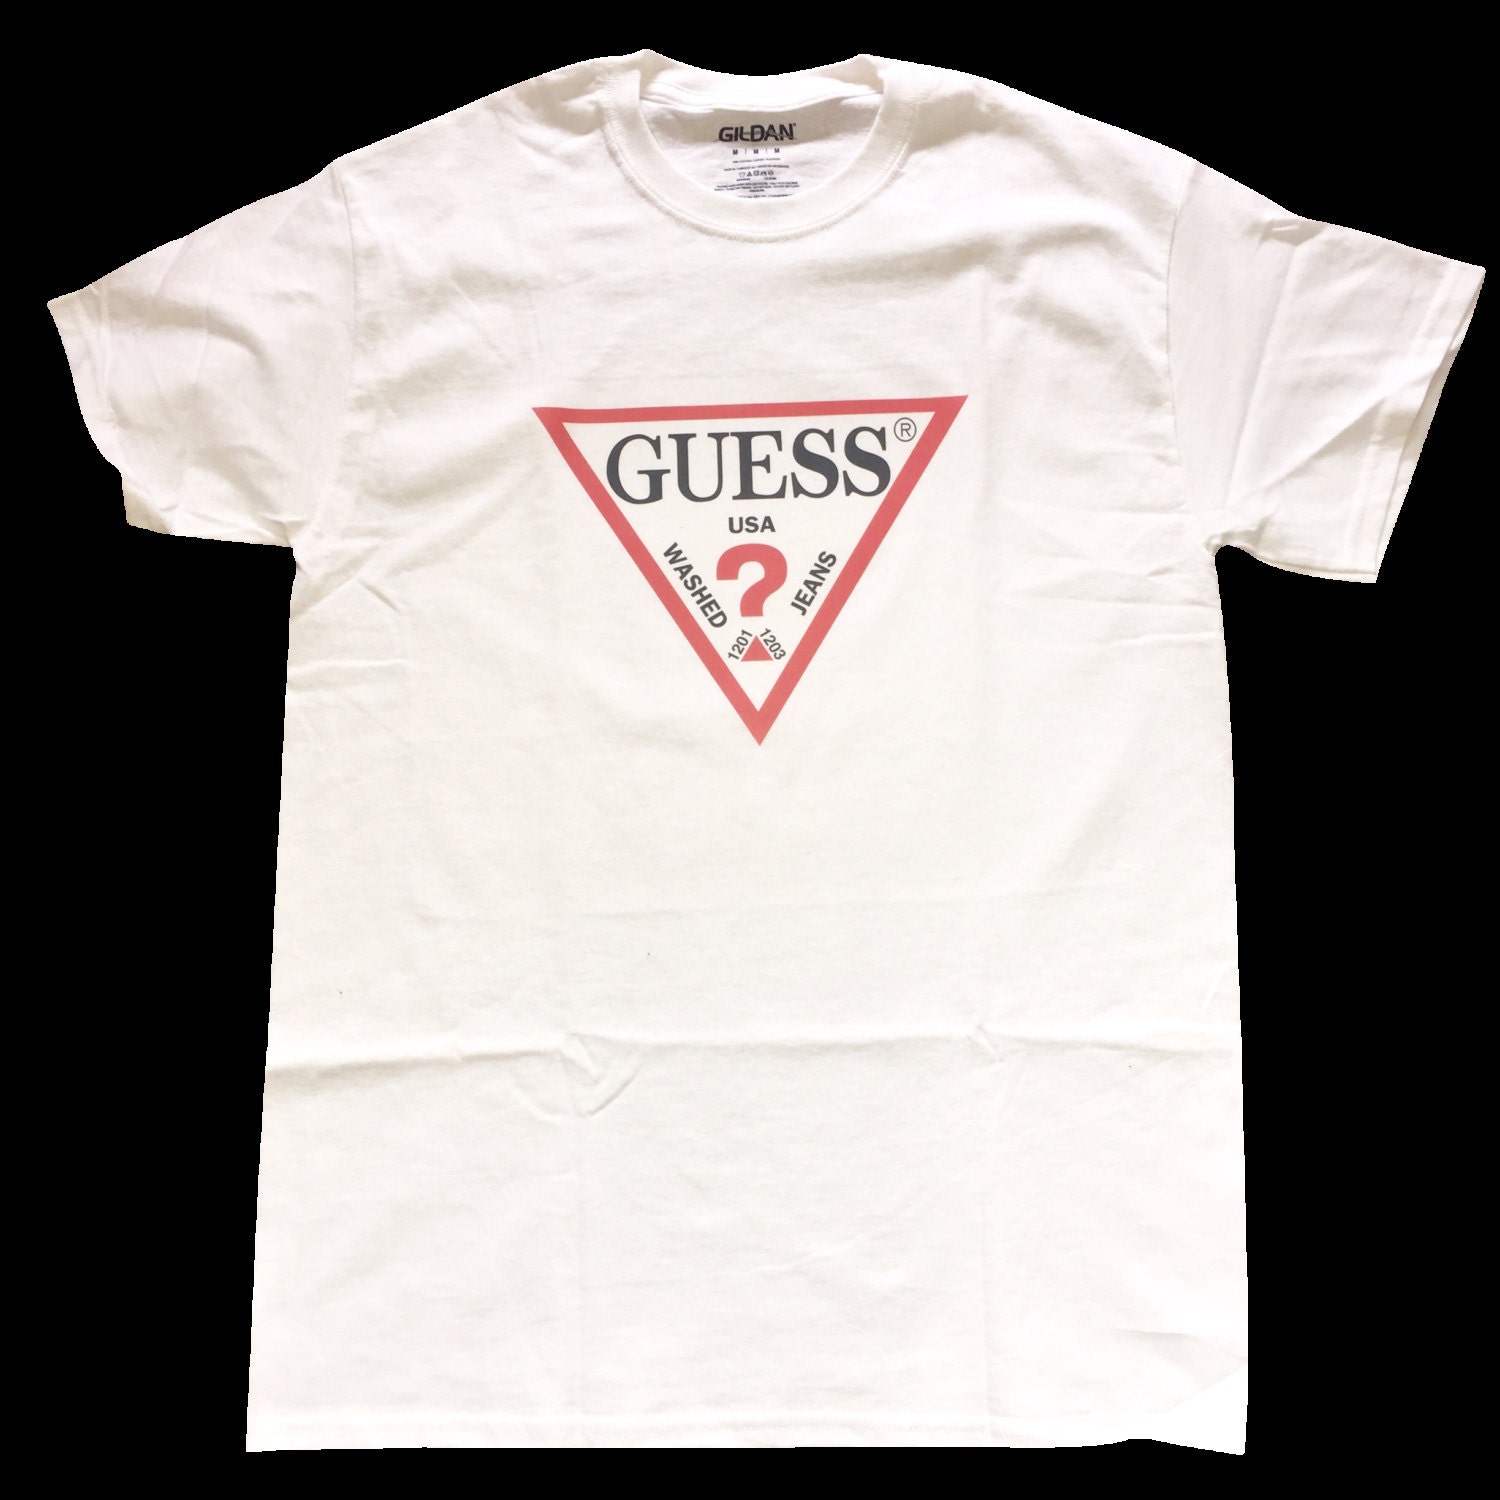 Sweden guess t shirt general pants out, Dresses that go with ankle boots, long sleeve shirt over t shirt. 